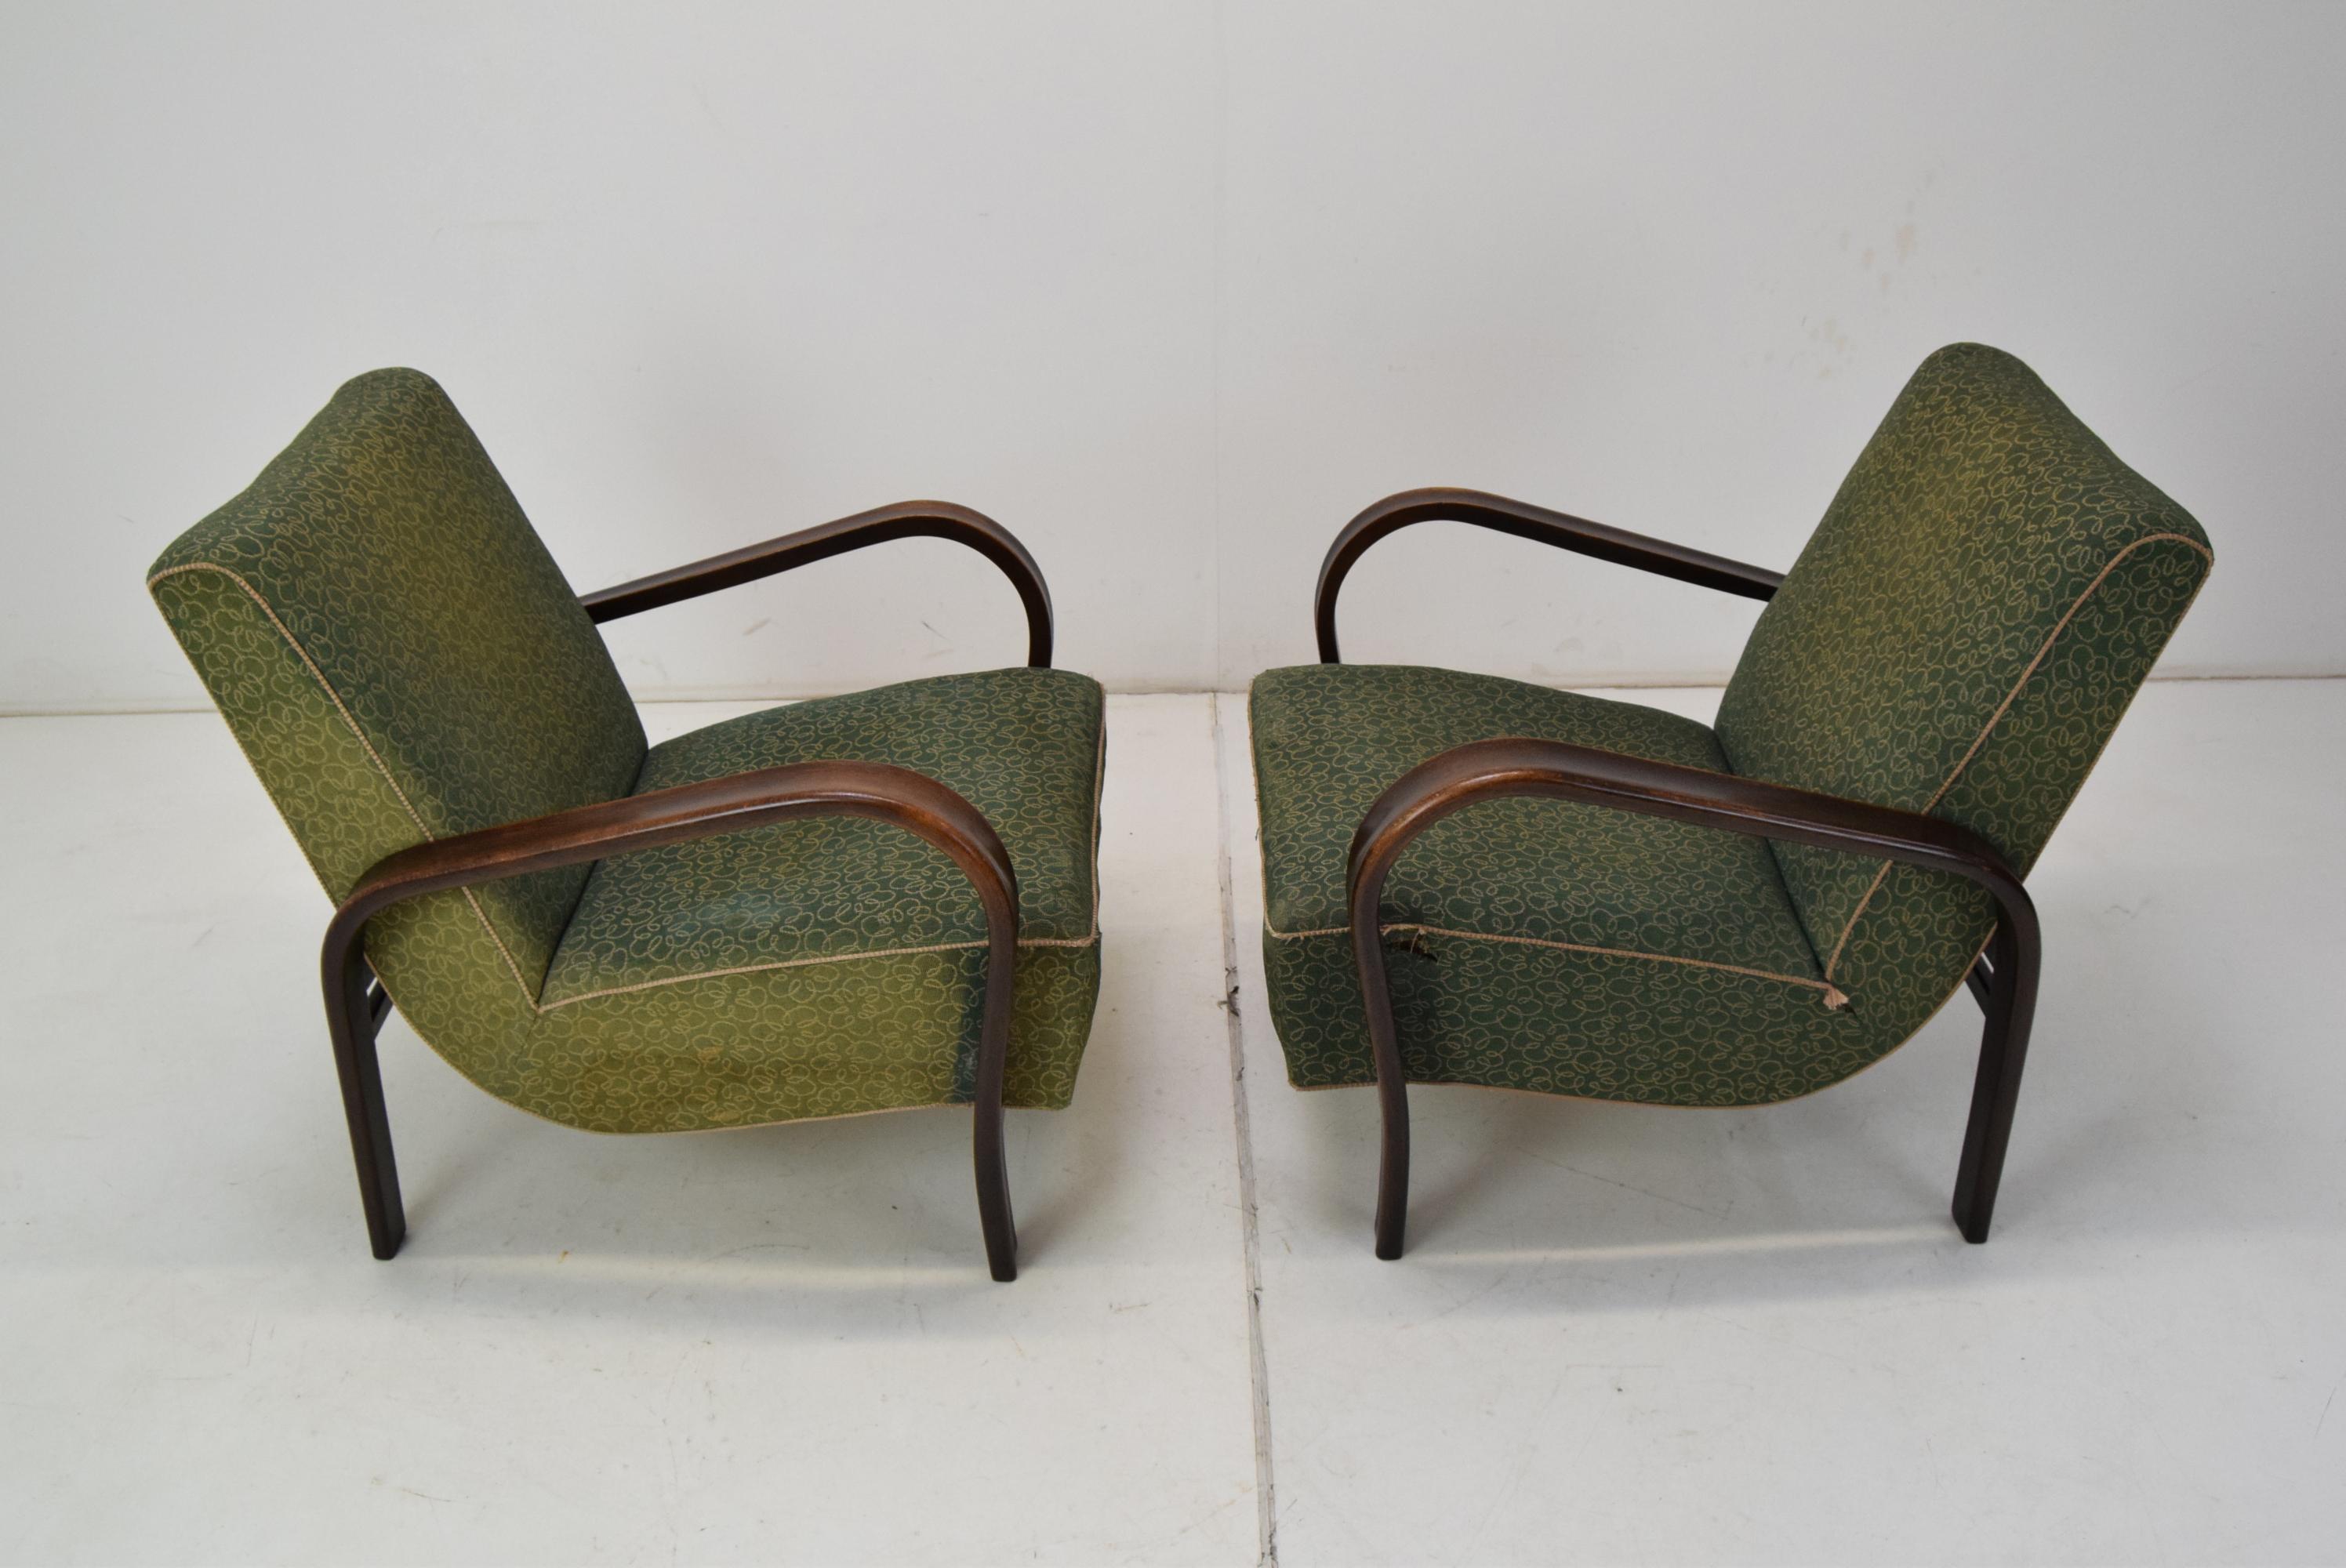 Mid-20th Century Pair of Art Deco Armchairs by Kropacek and Kozelka, 1930's.